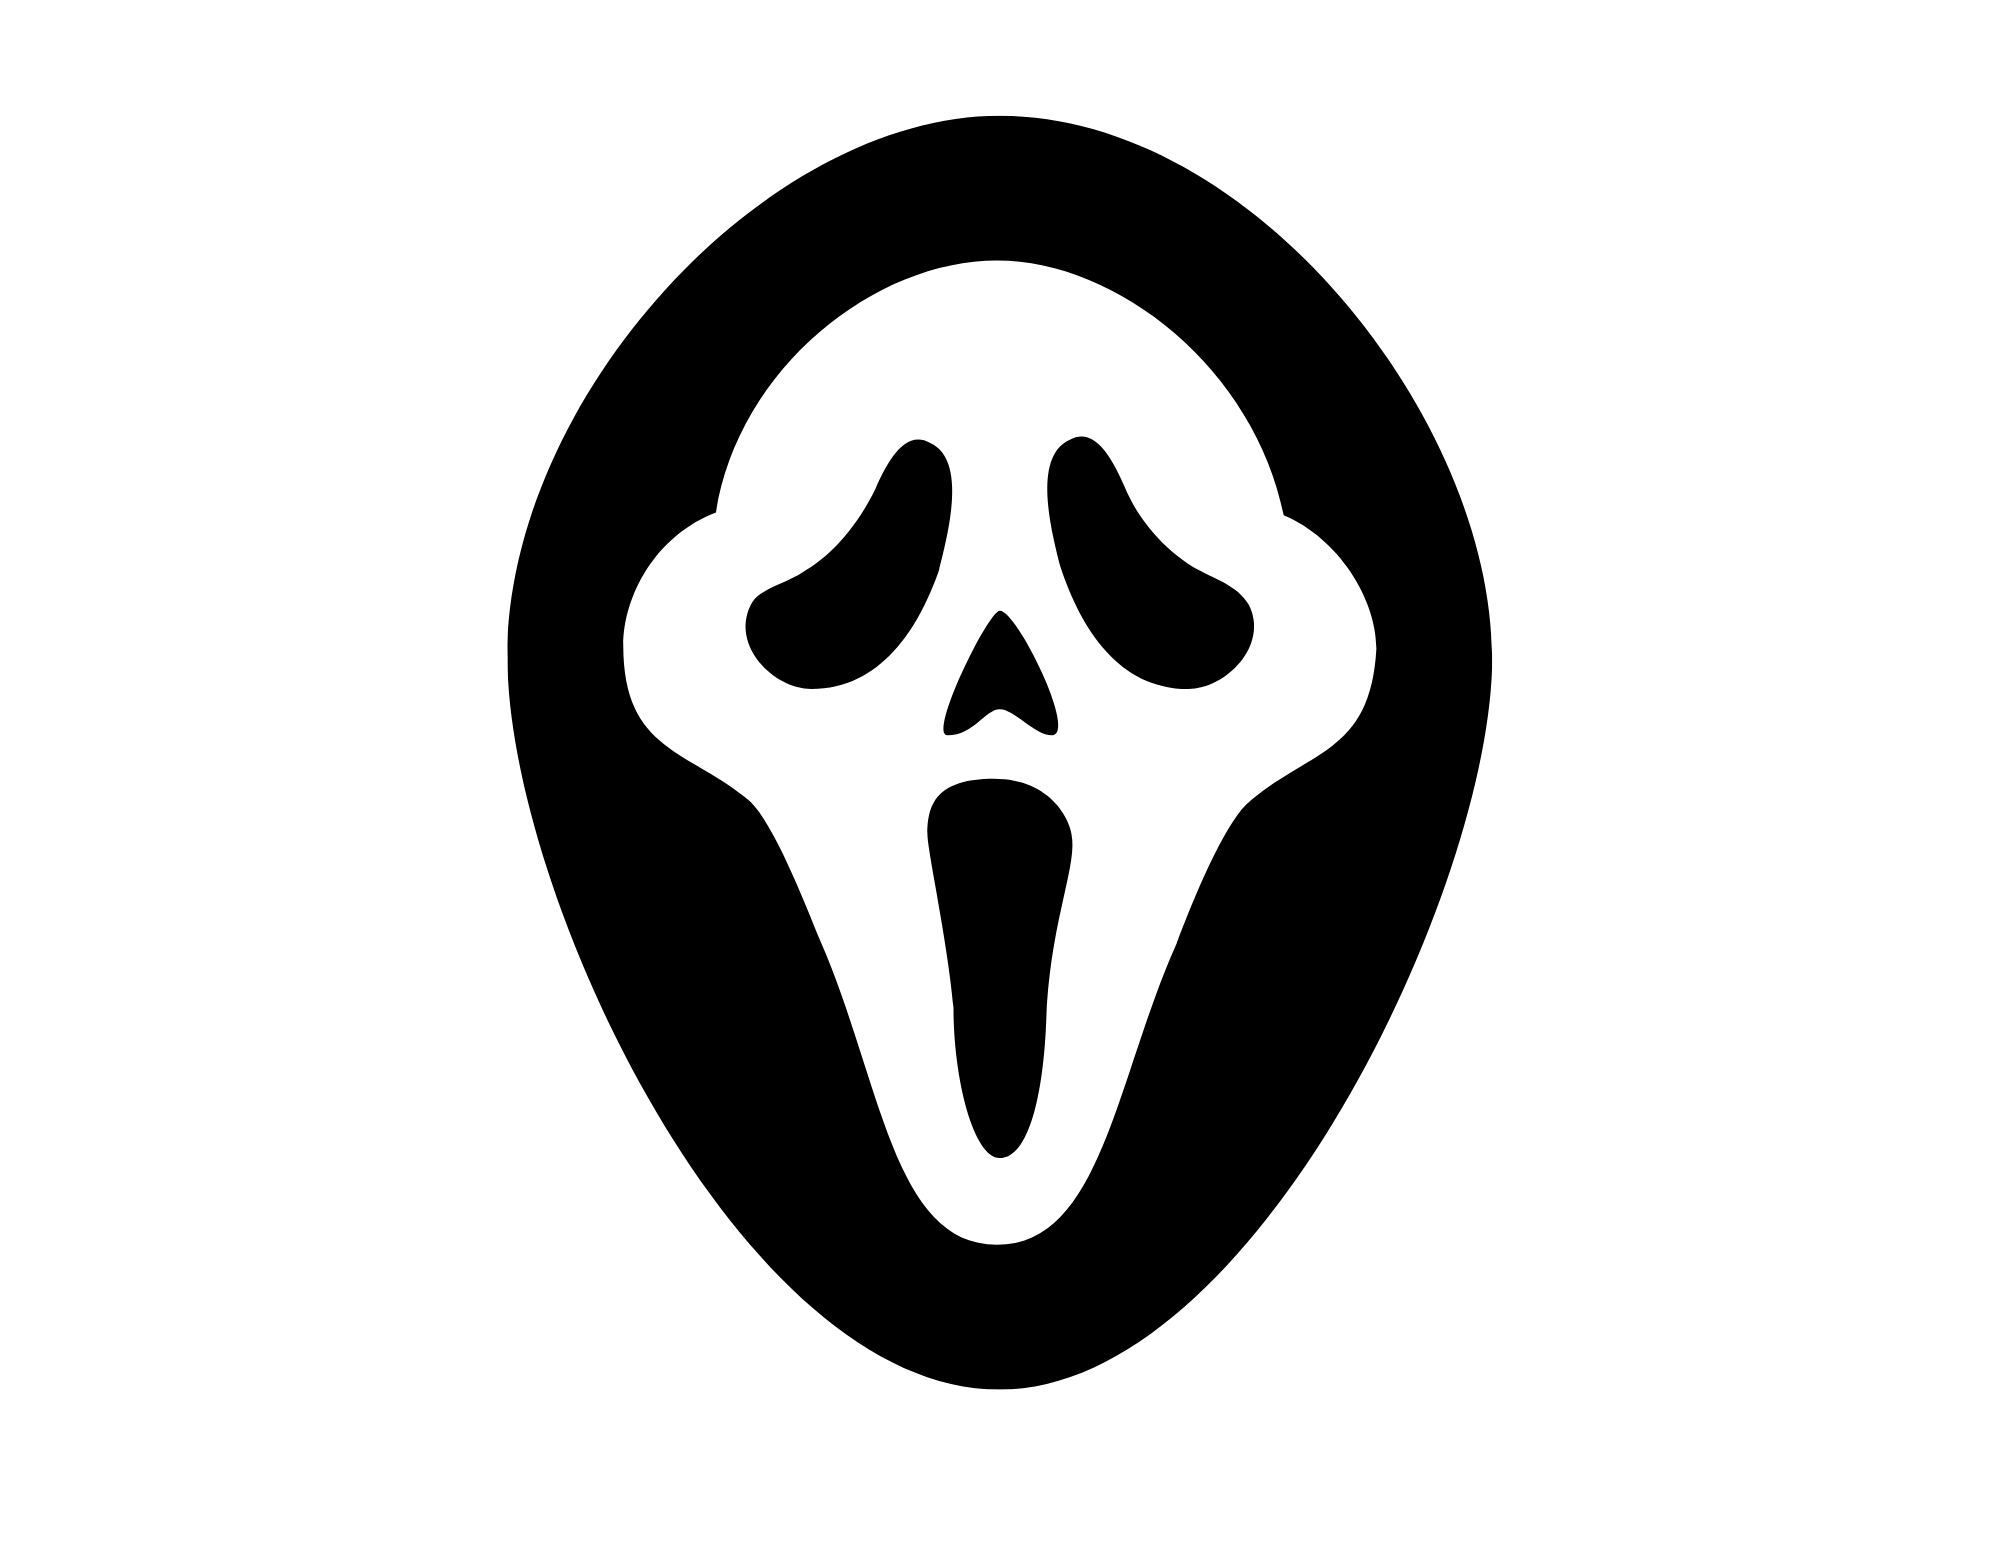 Scream Pumpkin Carving Stencil (FREE PRINTABLE); pumpkin carving scream face that you can print, trace and cut out on your pumpkin for Halloween!